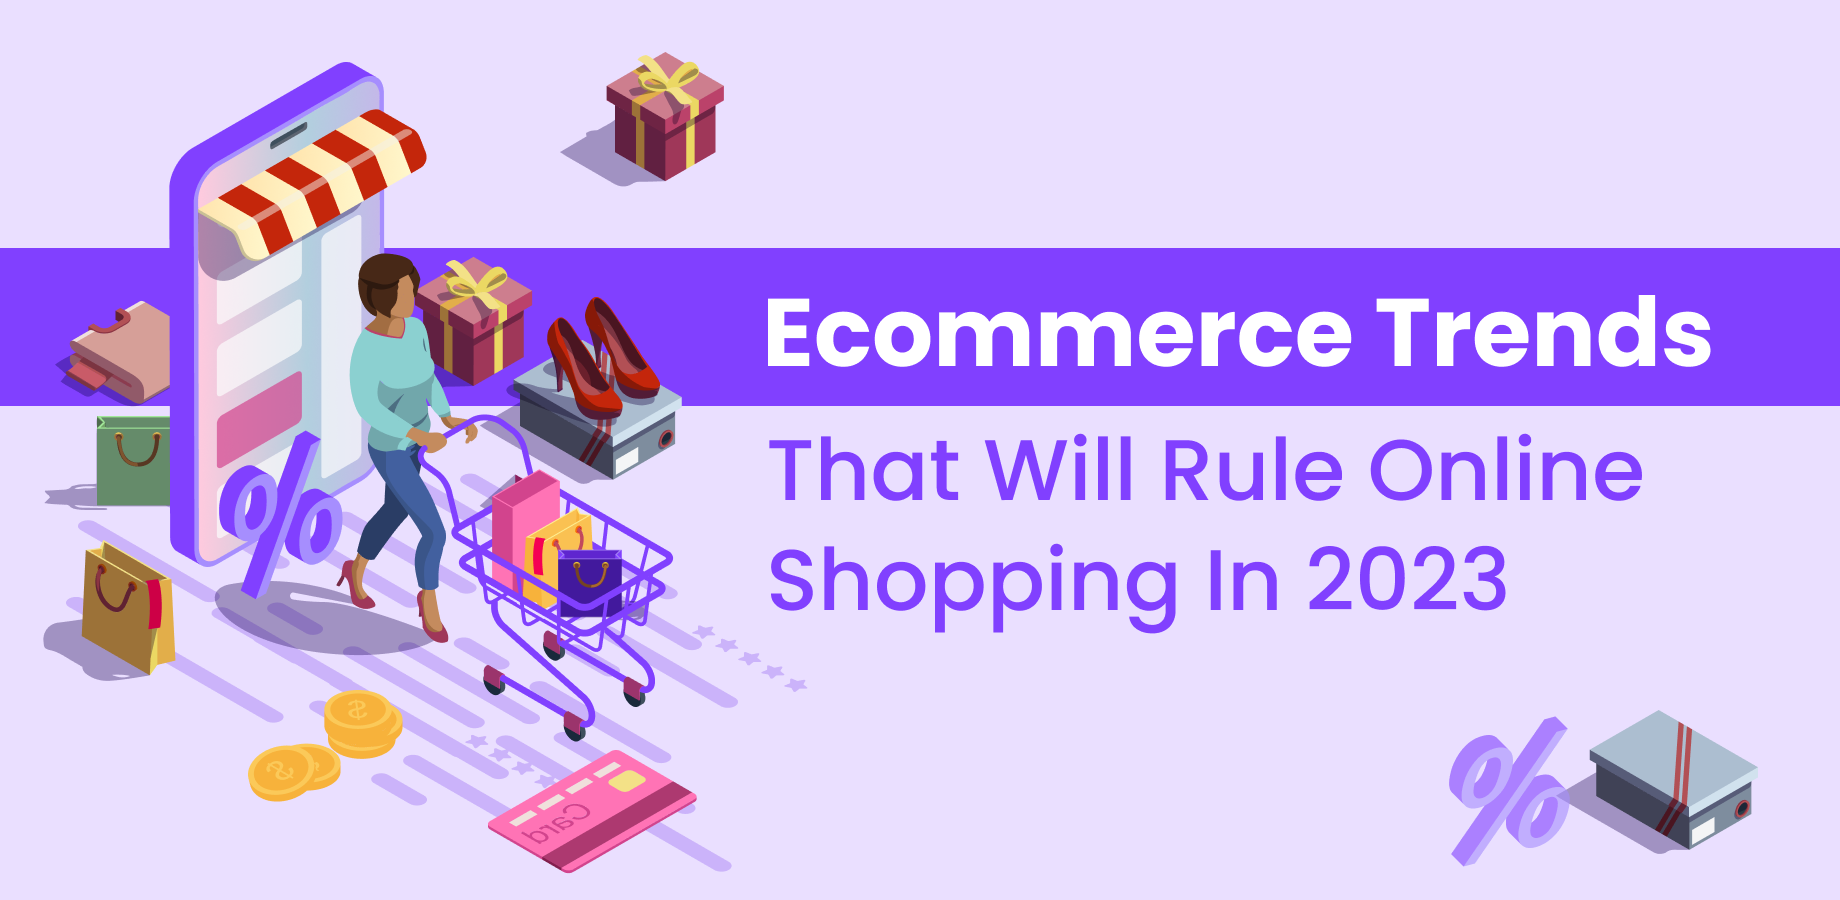 Ecommerce Trends That Will Rule Online Shopping In 2023